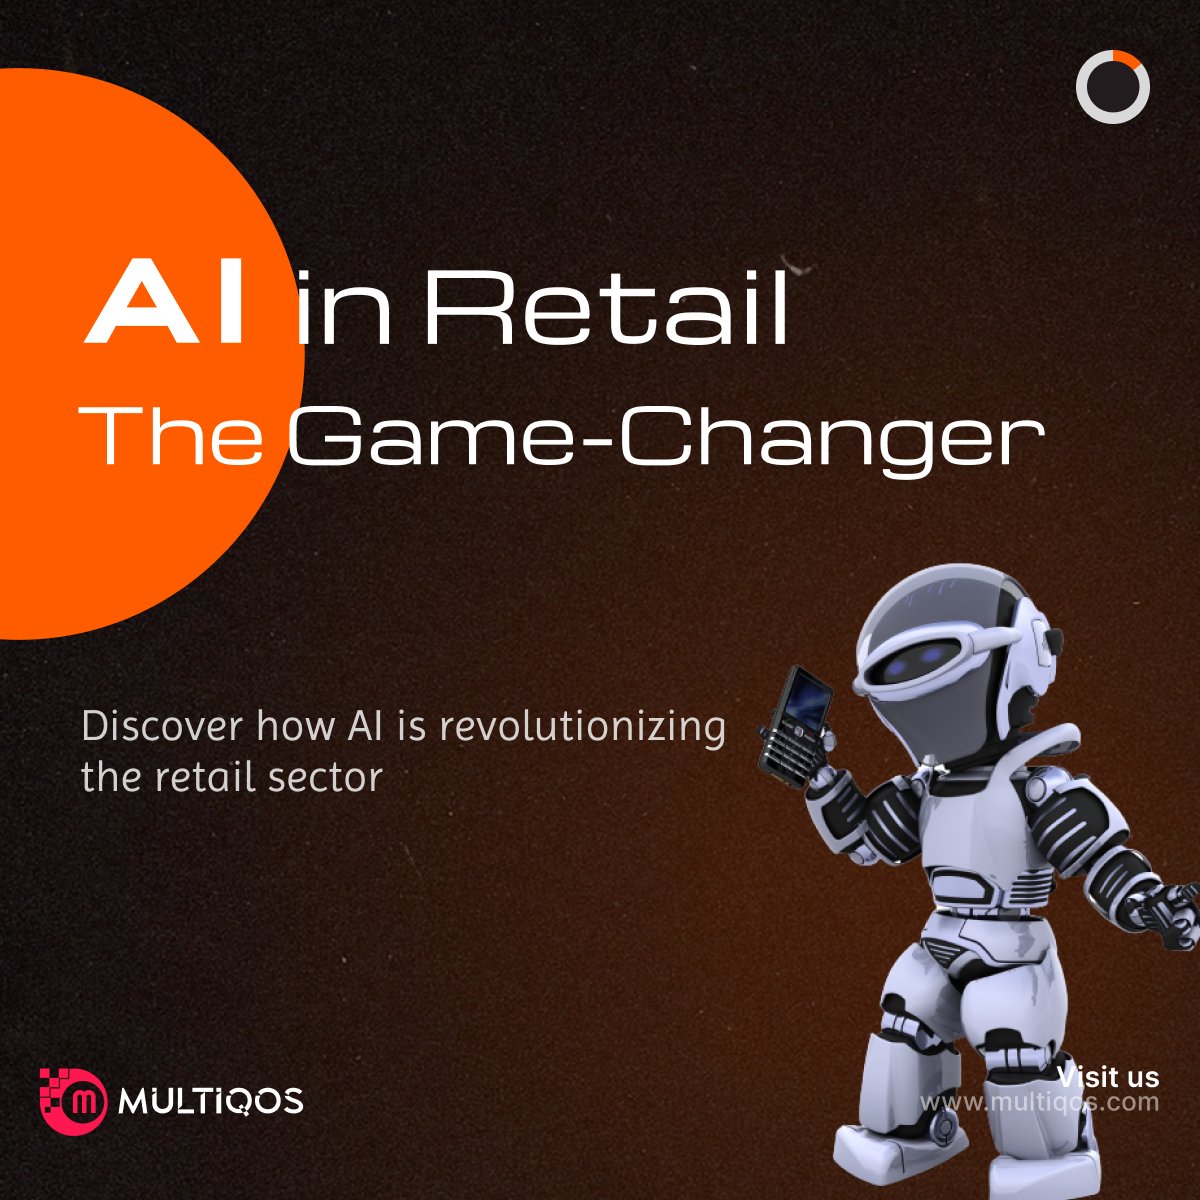 Embrace the Retail Revolution! AI is transforming the way we shop, bringing innovative solutions to the forefront. 

bit.ly/3Qpd1nO

#AIinRetail #RetailTech #FutureofRetail #InnovationInShopping #AIRevolution #SmartRetail #knowledgesharing #multiqos #information